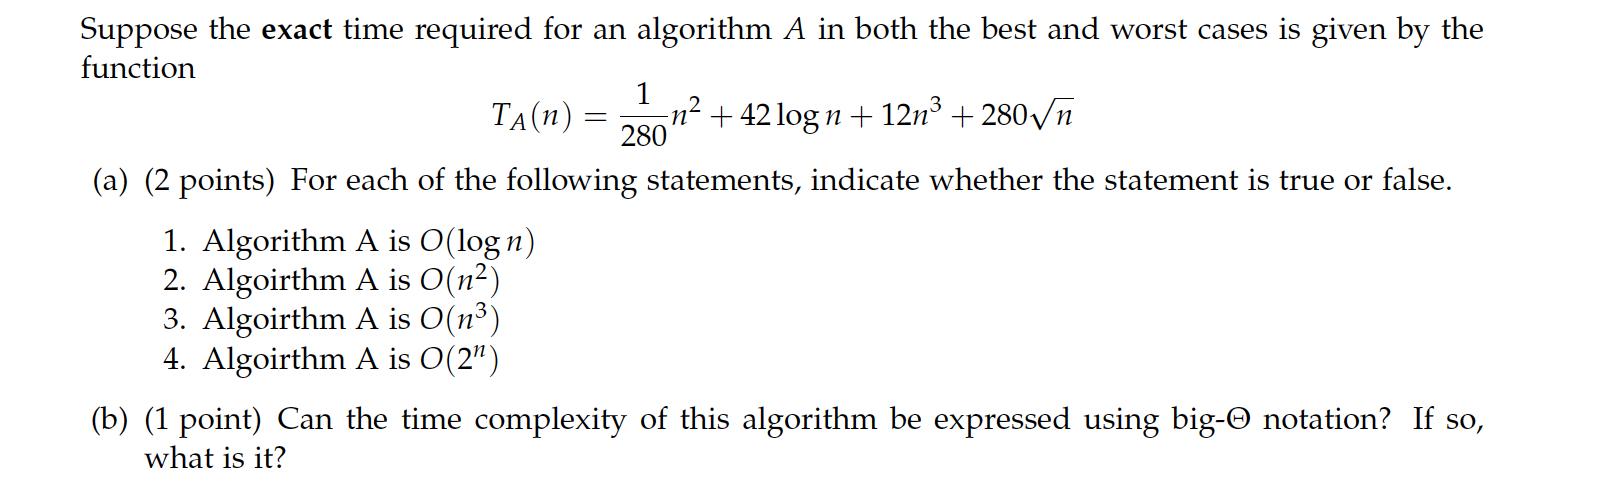 Suppose the exact time required for an algorithm A in both the best and worst cases is given by the function